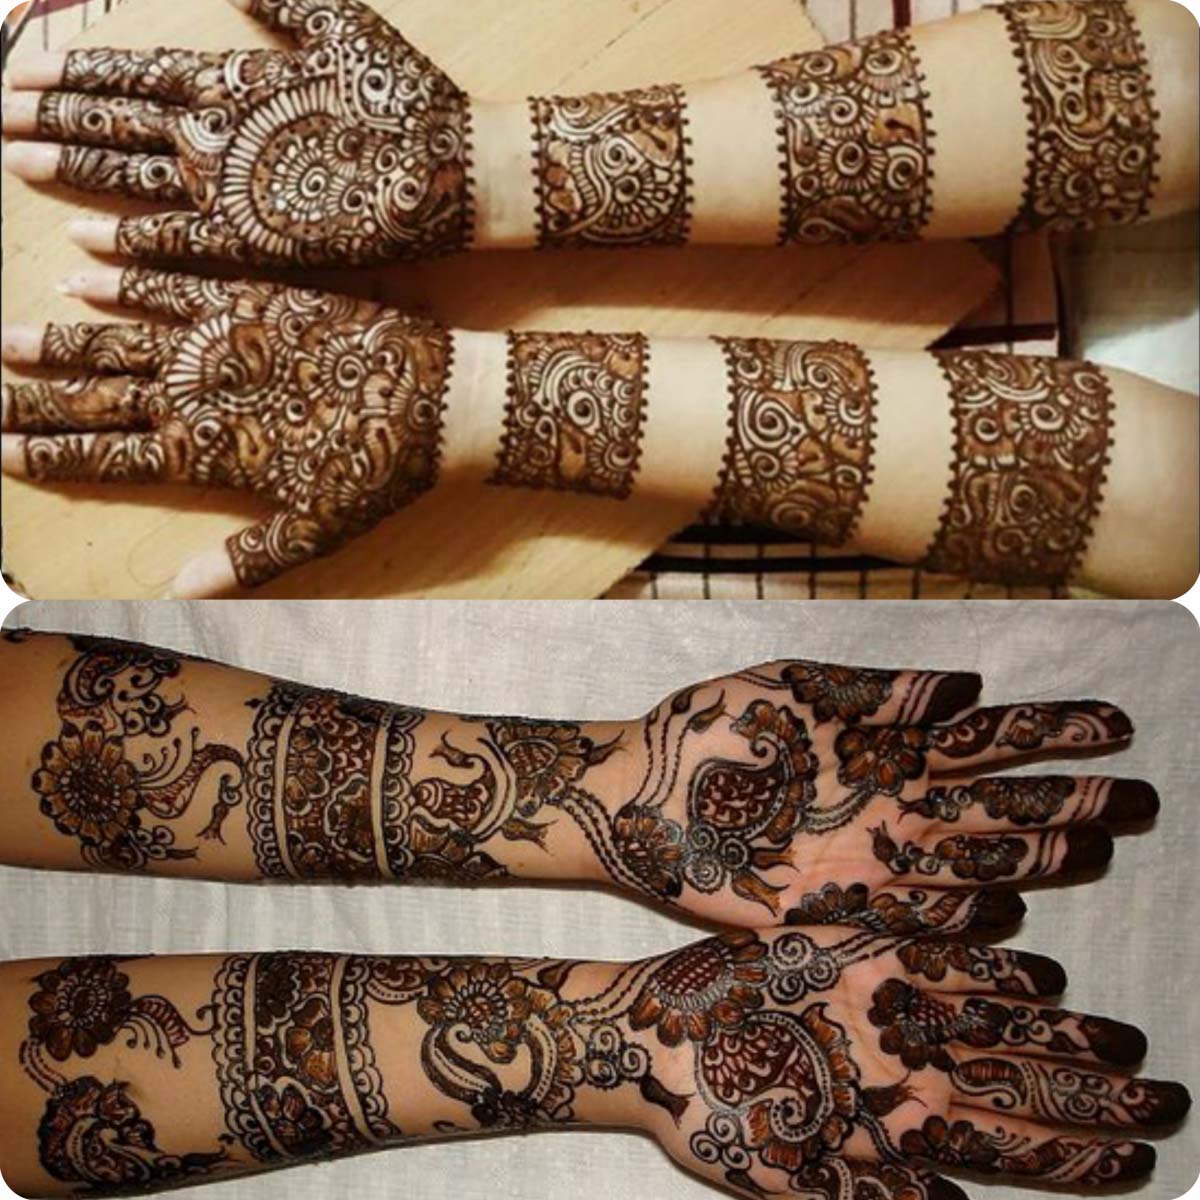 15 Bridal Armlet Design Ideas for Beautifully Adorned Arms for Wedding –  OYO Hotels: Travel Blog